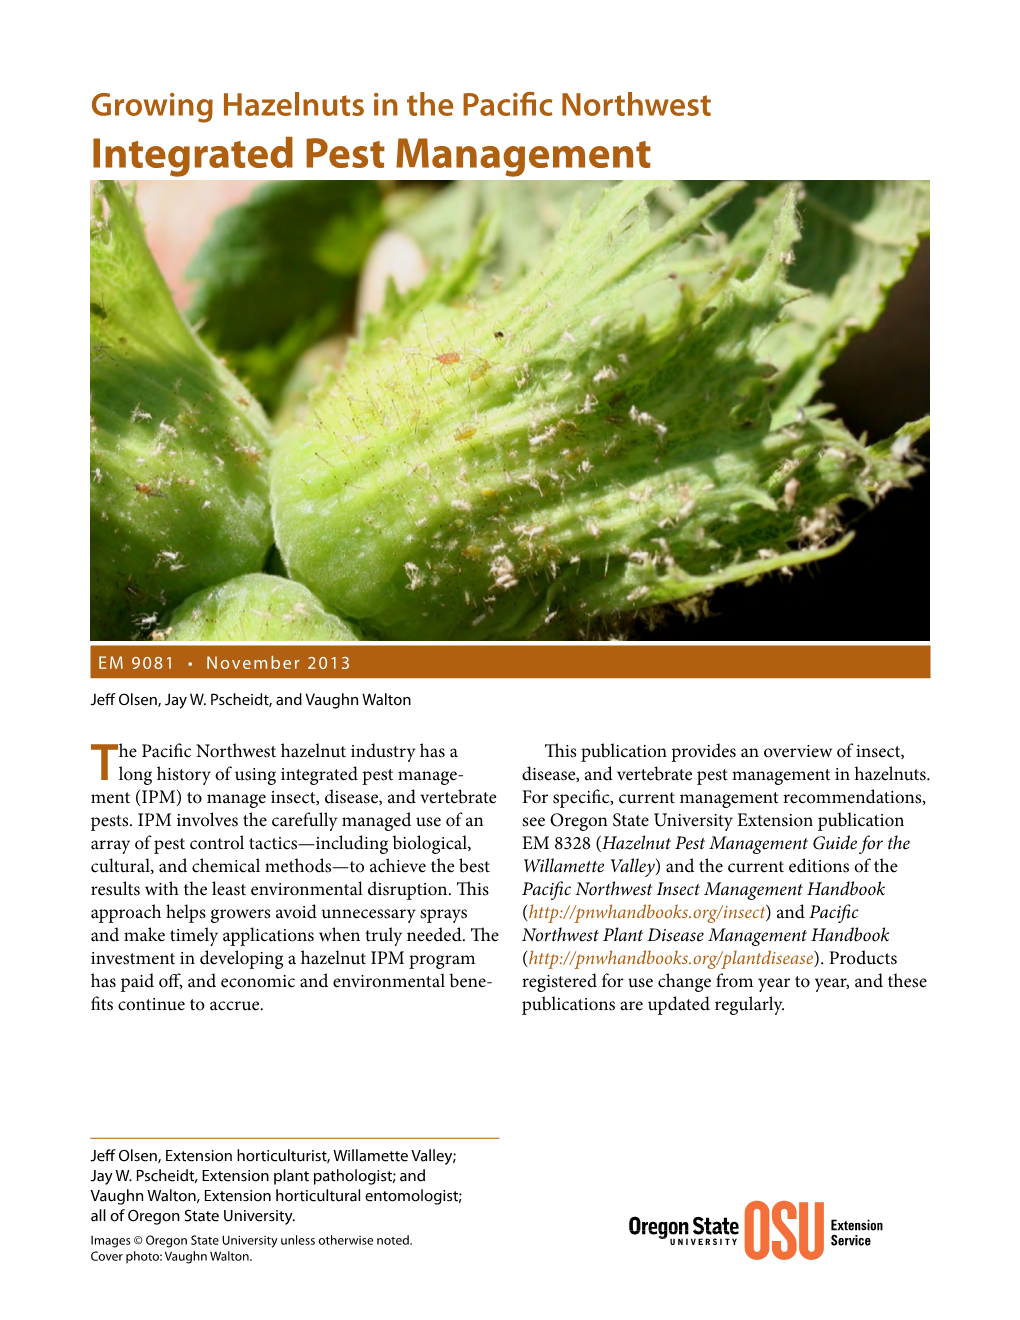 Growing Hazelnuts in the Pacific Northwest: Integrated Pest